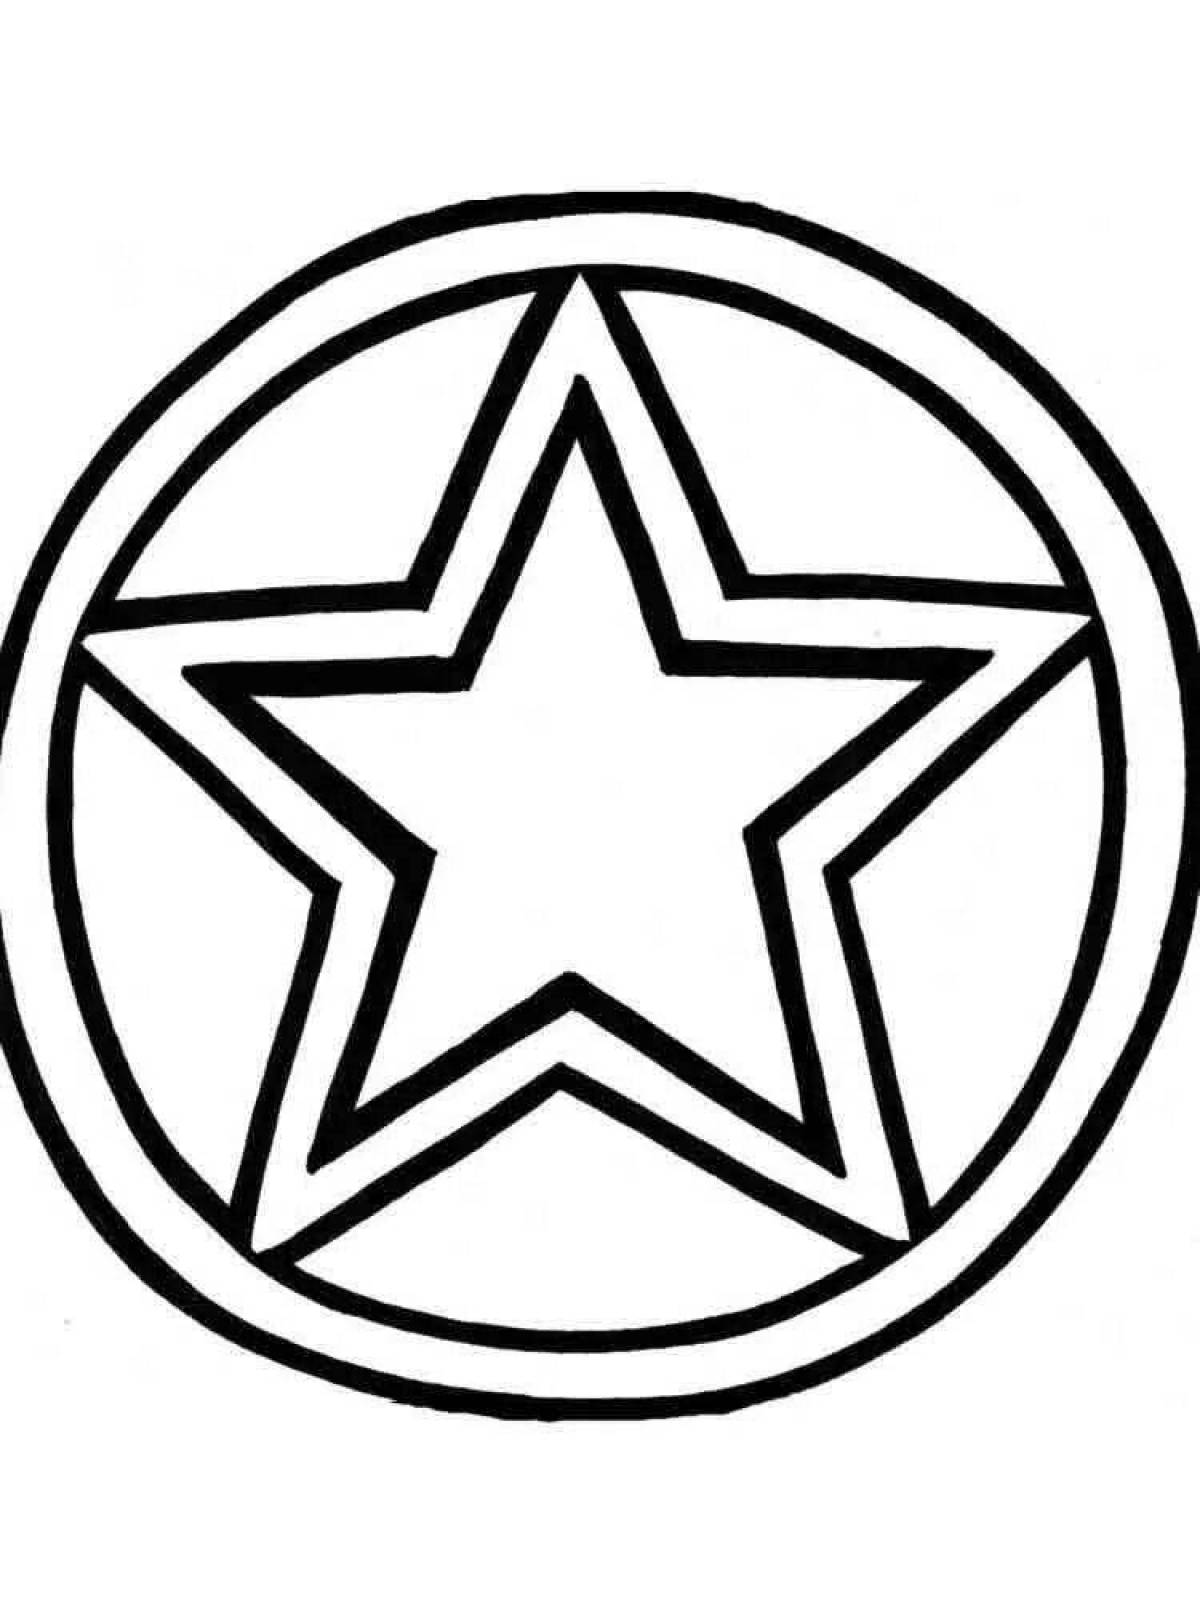 Awesome military star coloring page